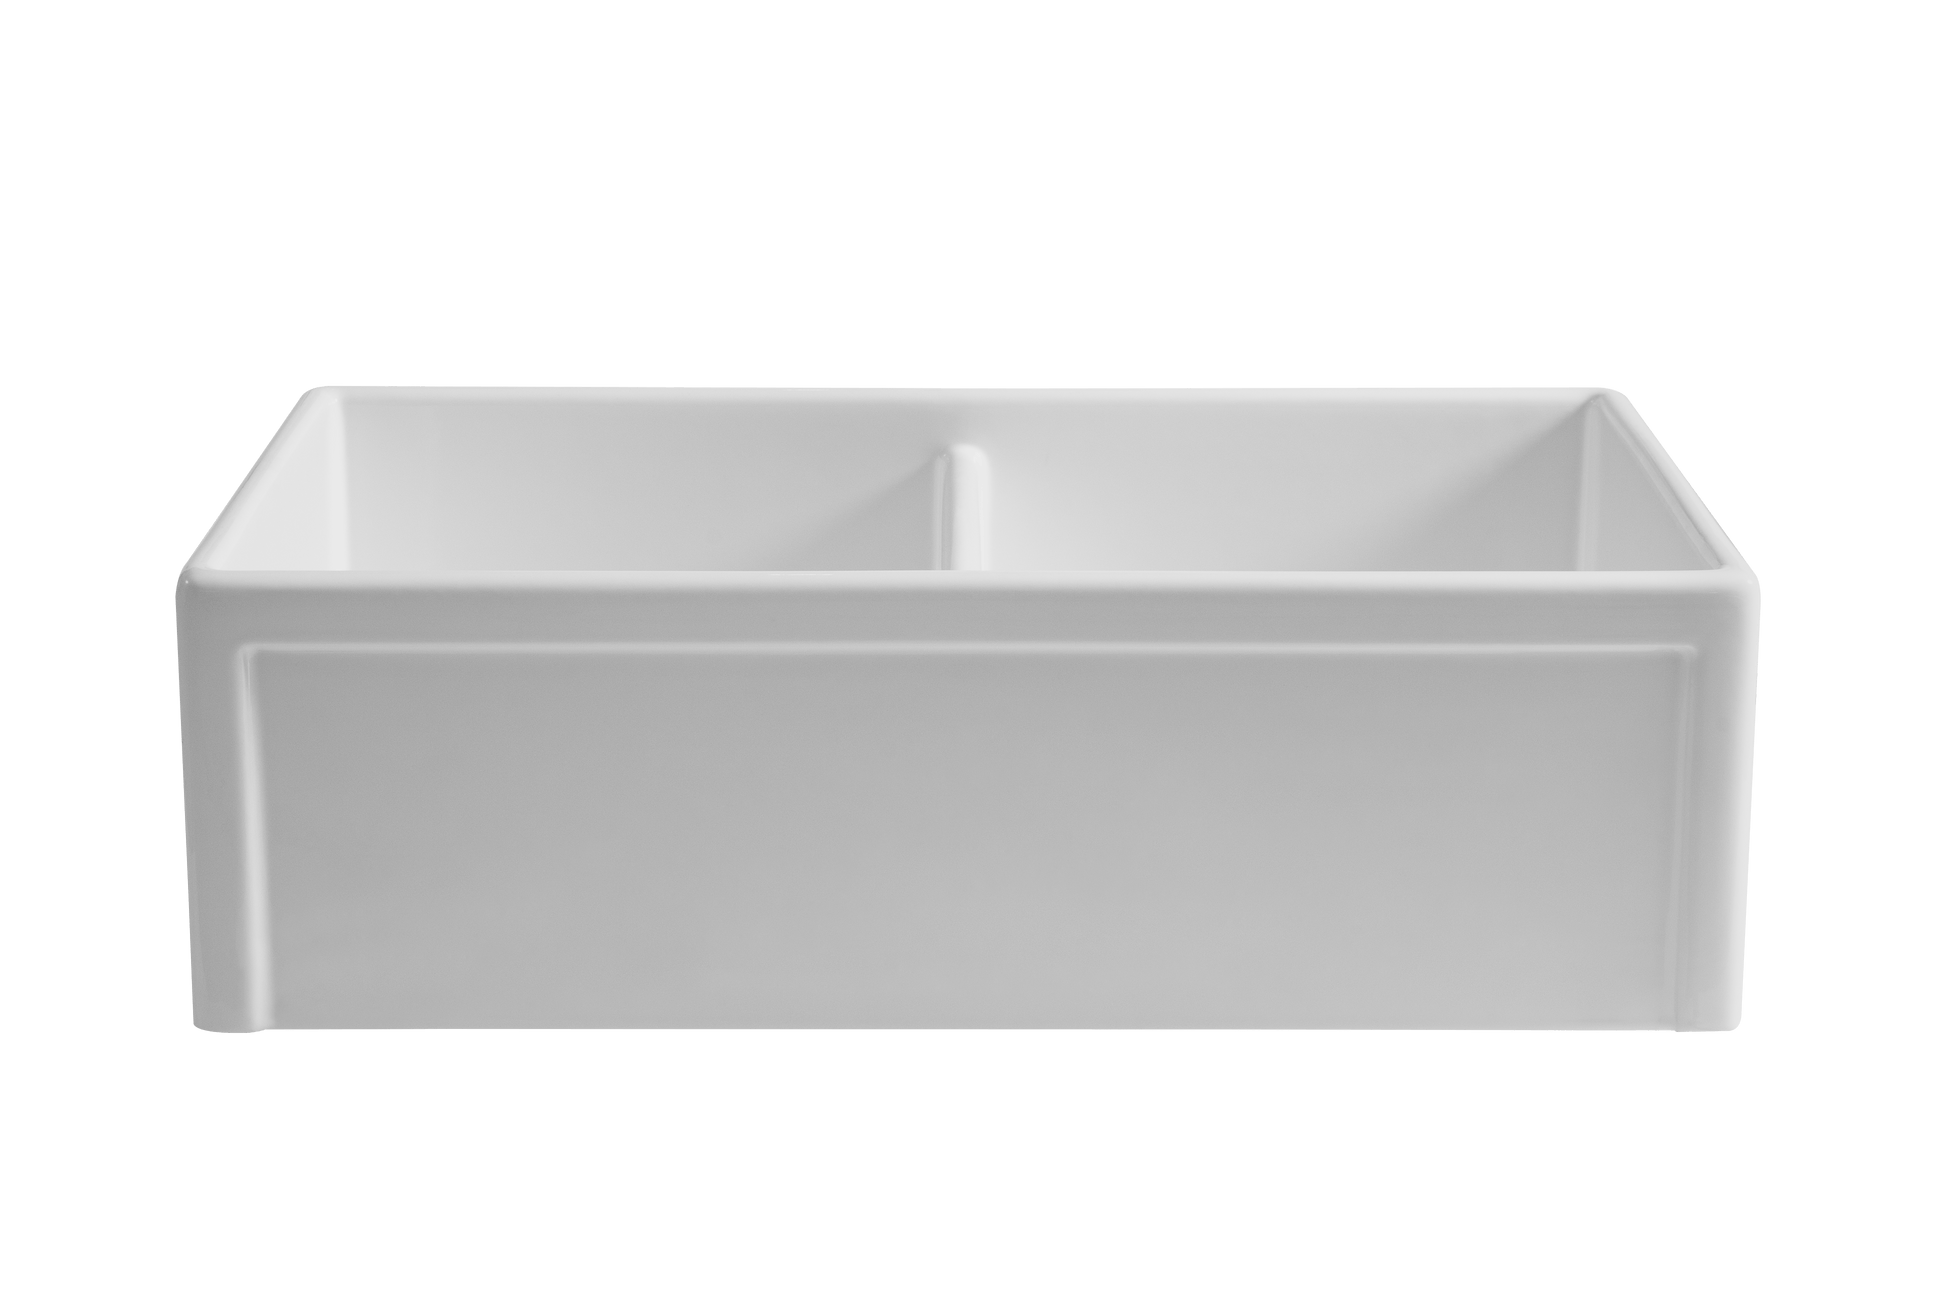 Double Country Offset Sink